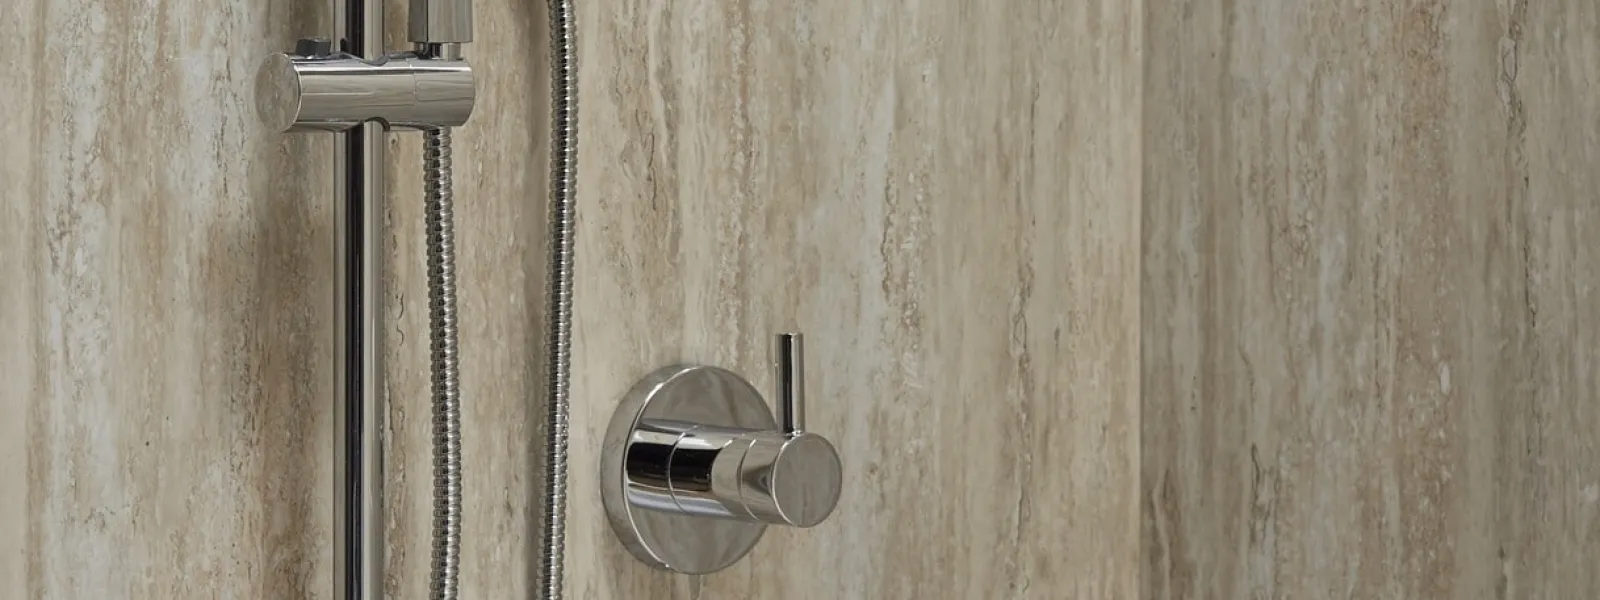 Shower wall options at Expo Home Improvement